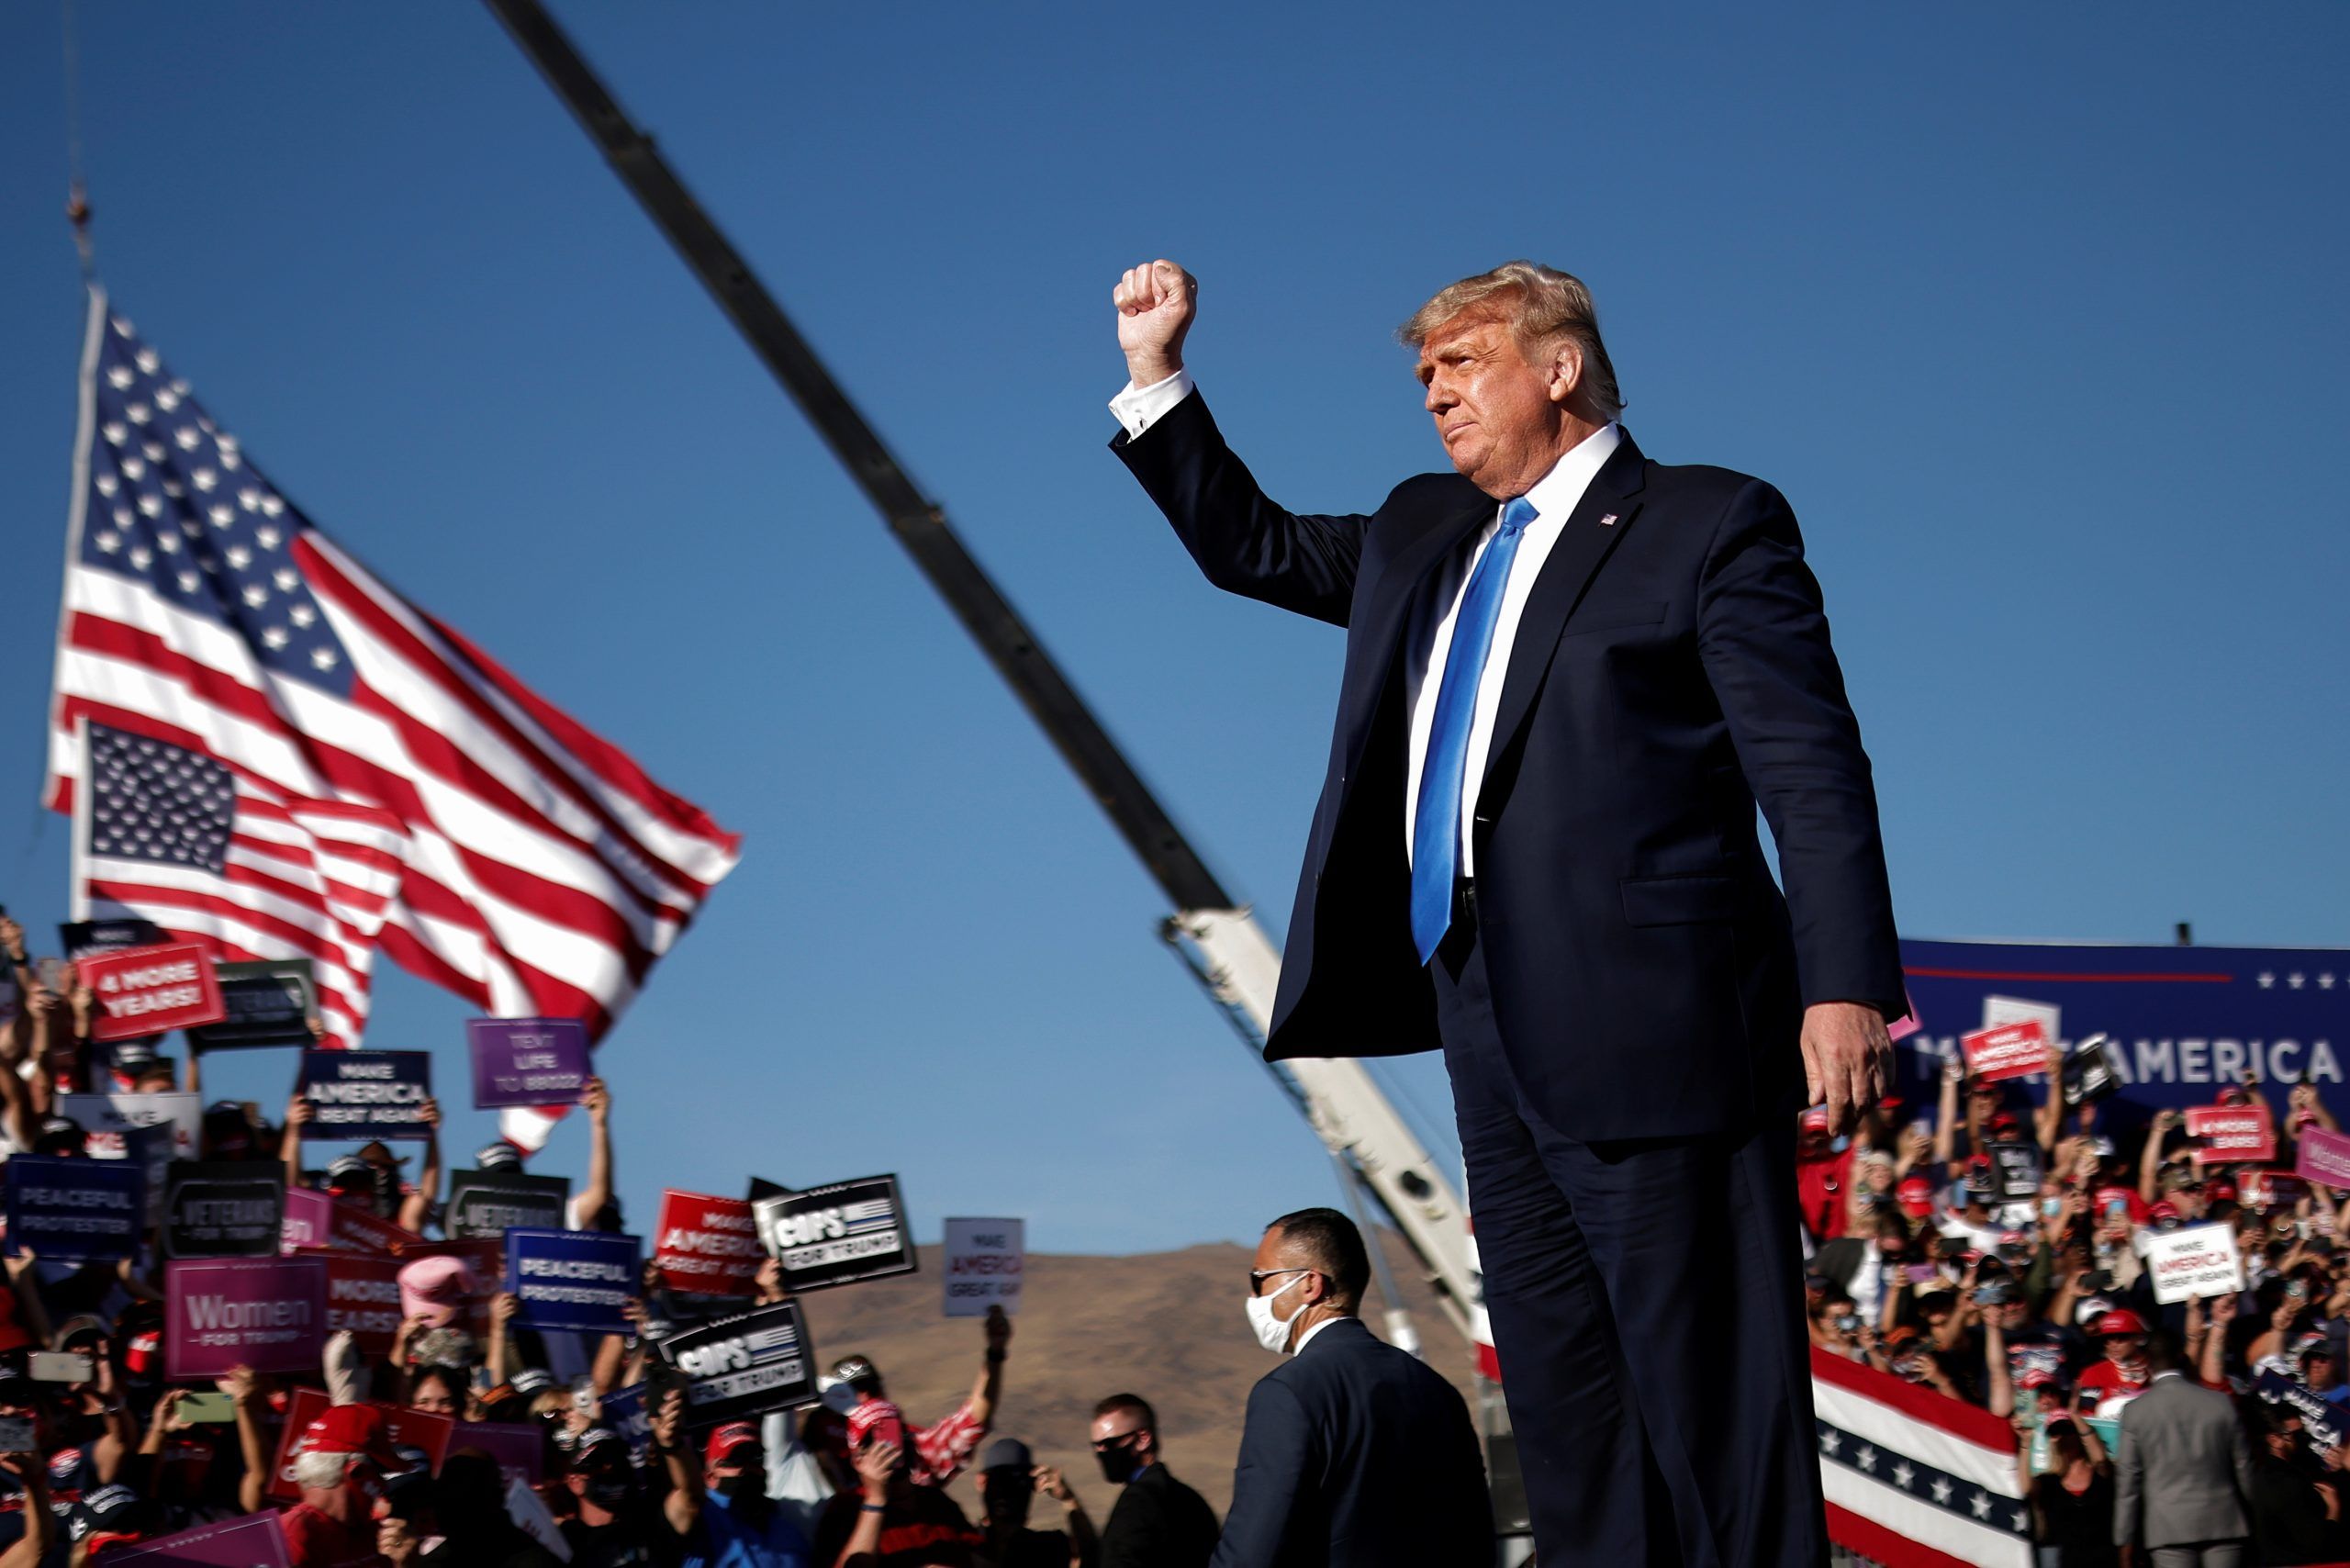 U.S. President Donald Trump raises his fist during a campaign rally in Carson City, Nevada, U.S., October 18, 2020. REUTERS/Carlos Barria